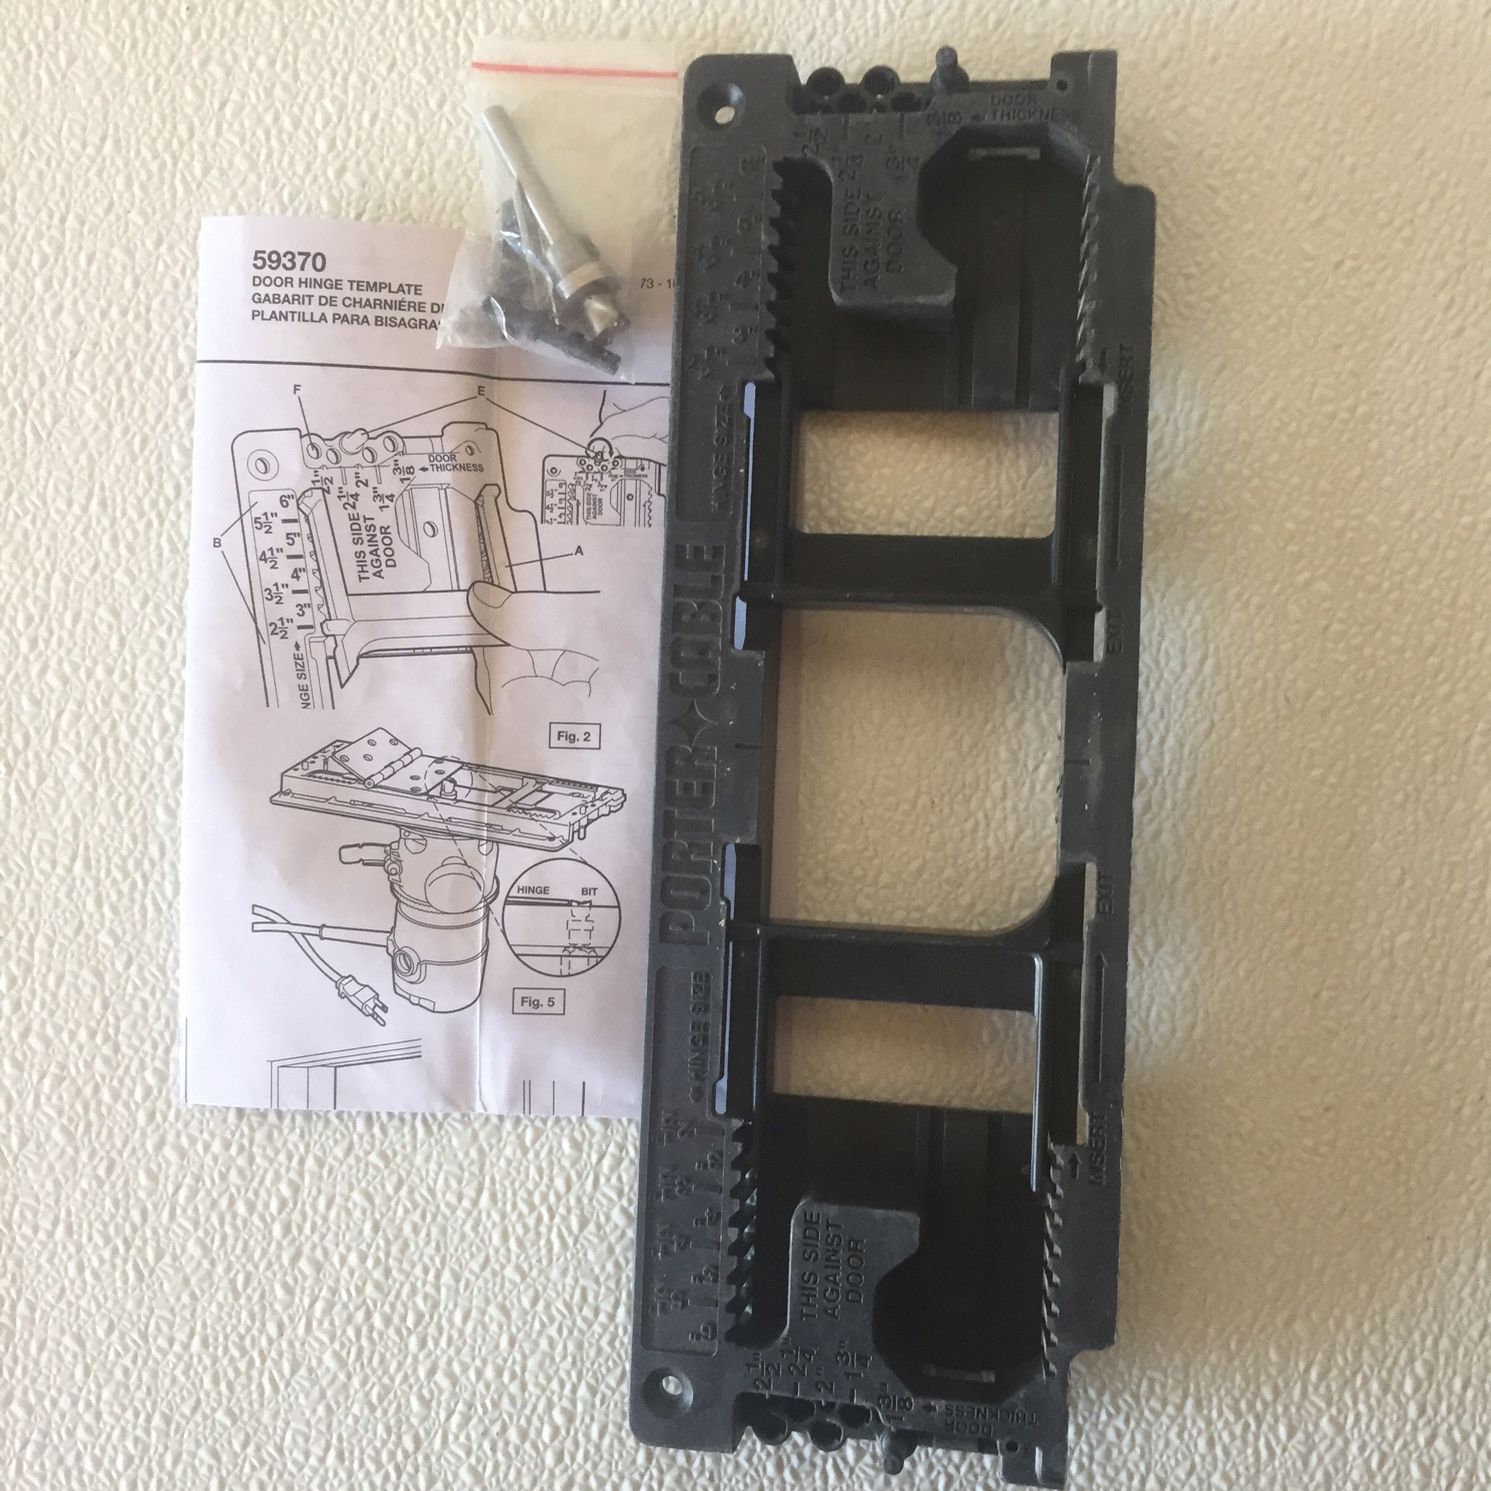 Porter Cable Hinge Template for Sale in El Centro, CA OfferUp